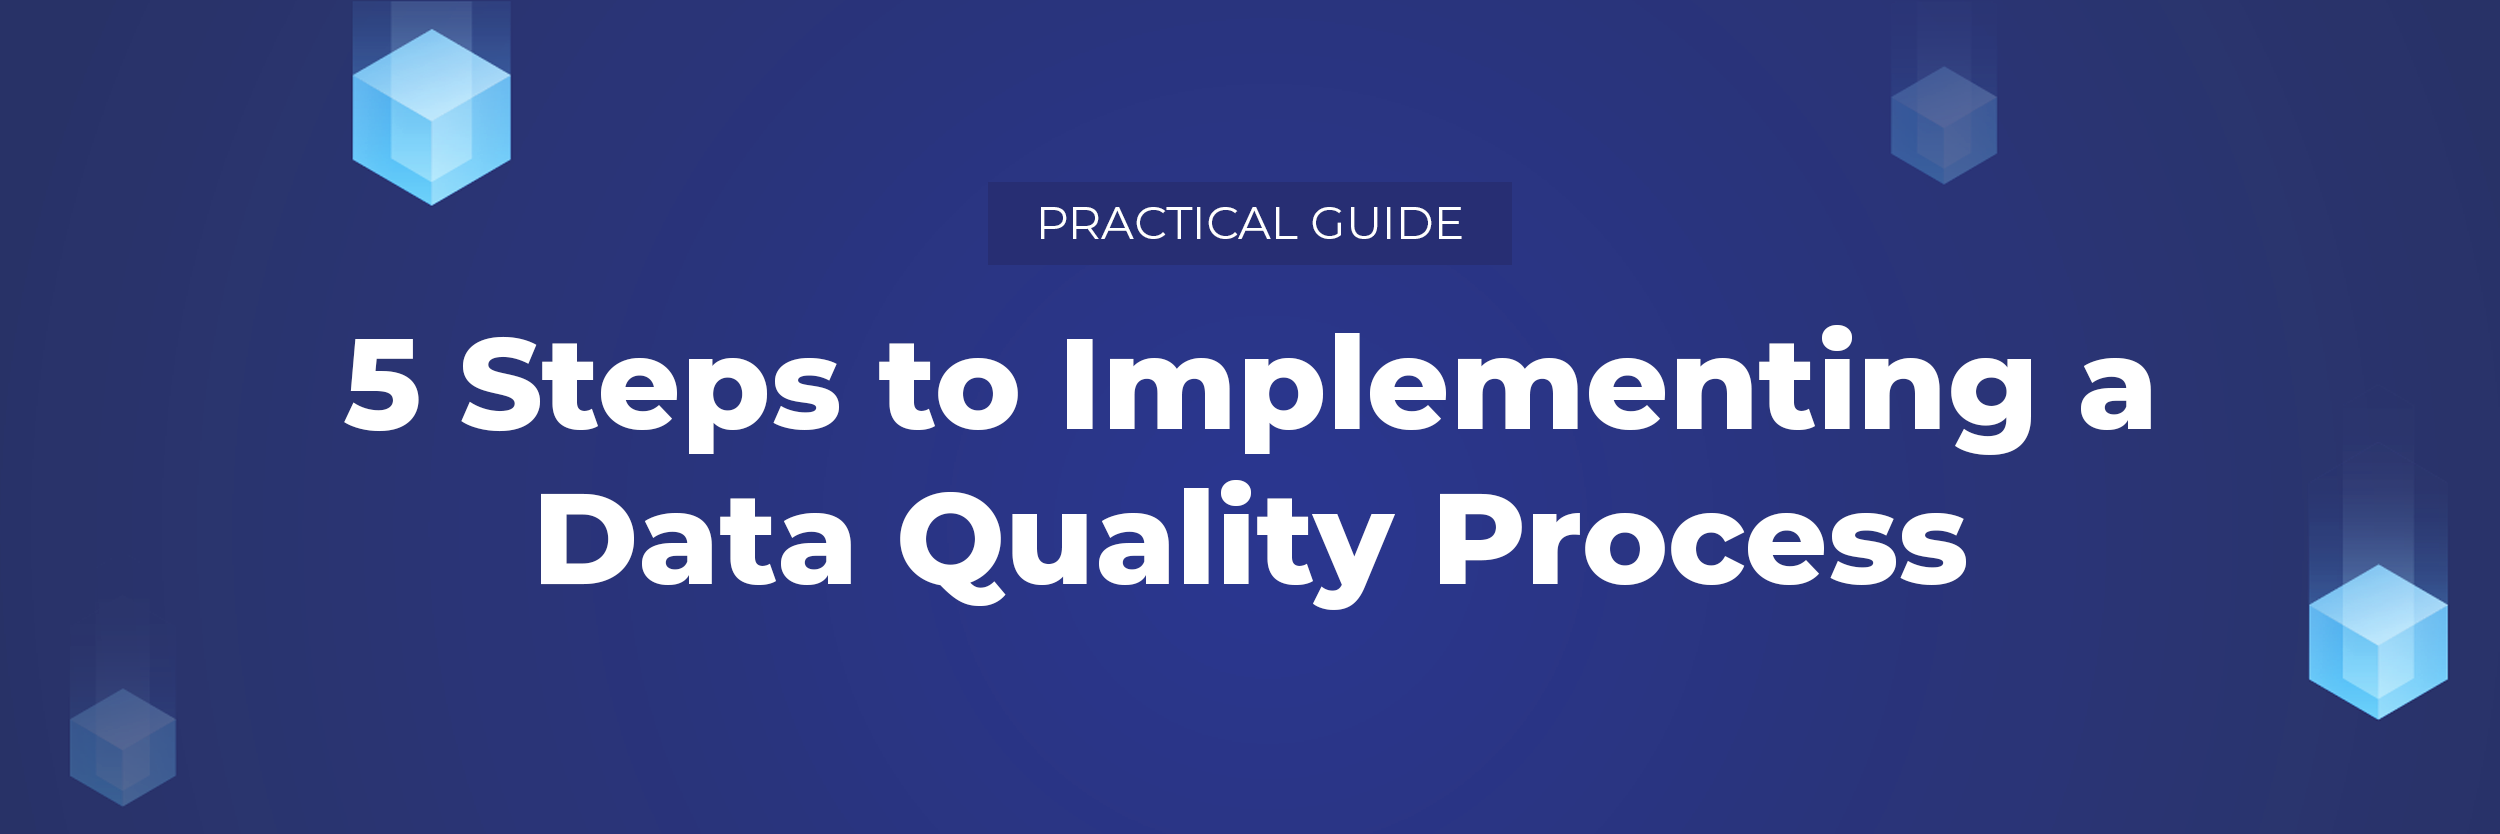 [Practical guide] Your Data Quality process in 5 steps